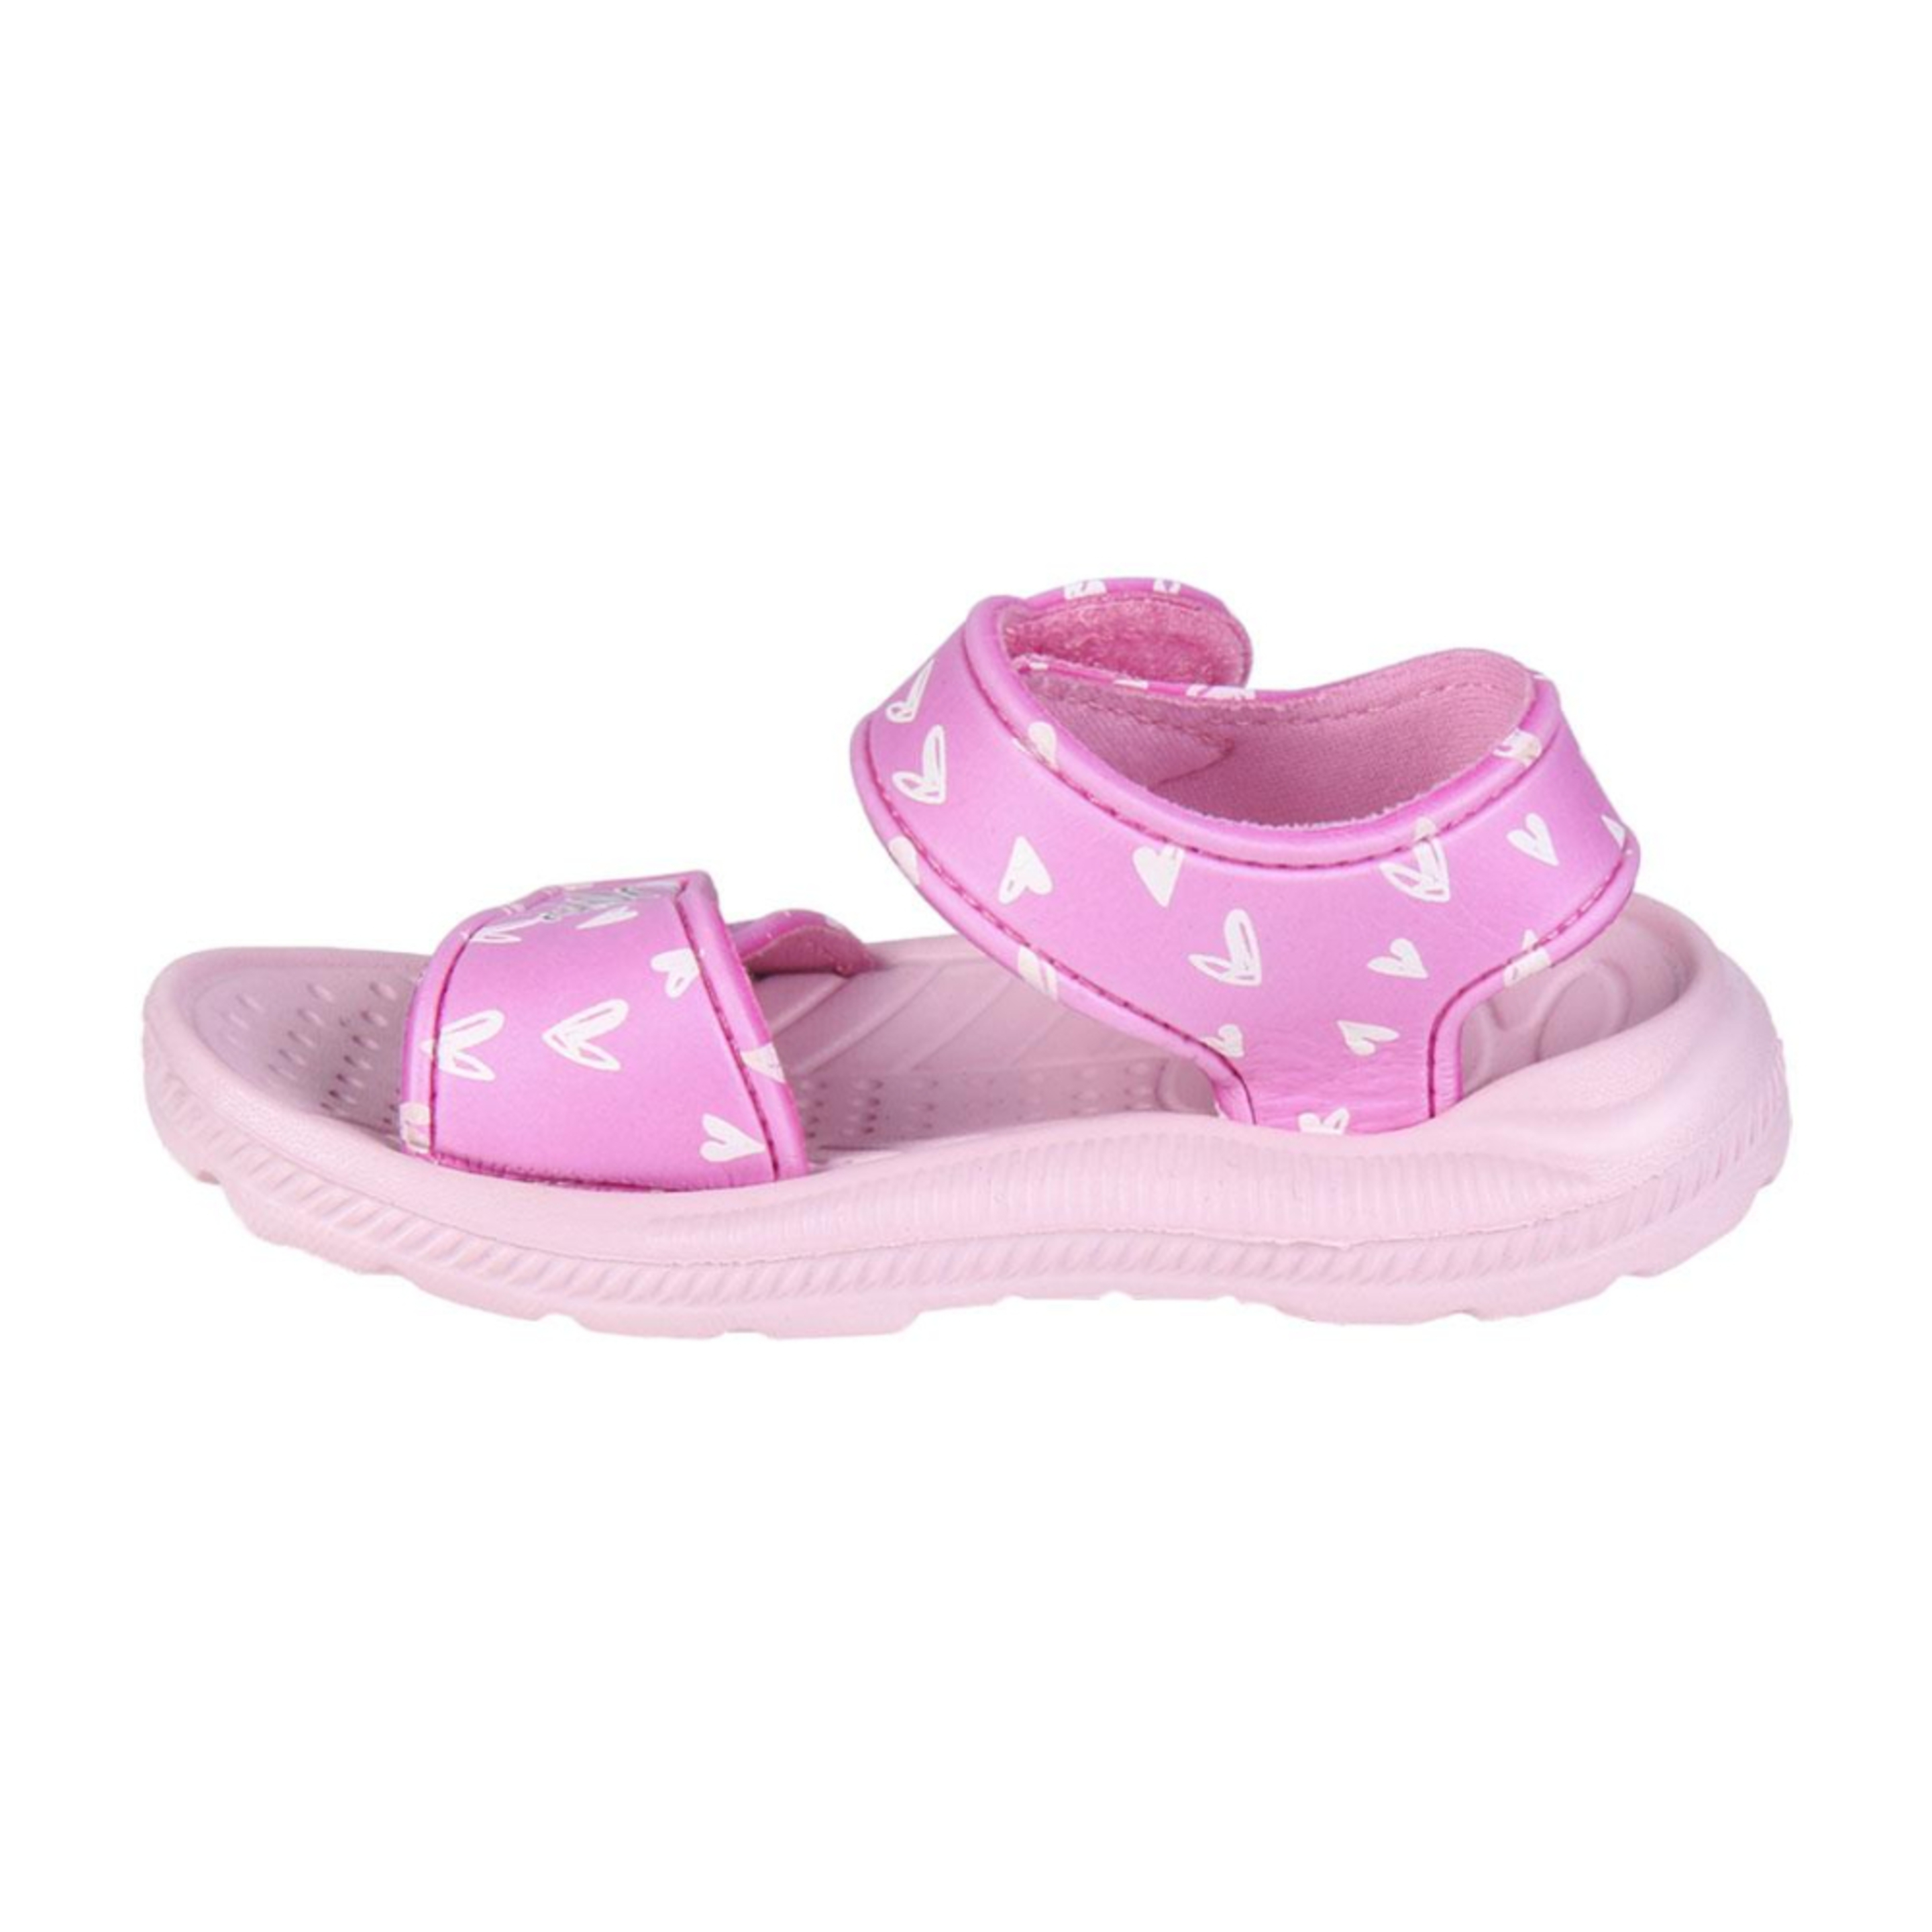 Minnie Mouse Sandals 71485 - Rosa | Sport Zone MKP